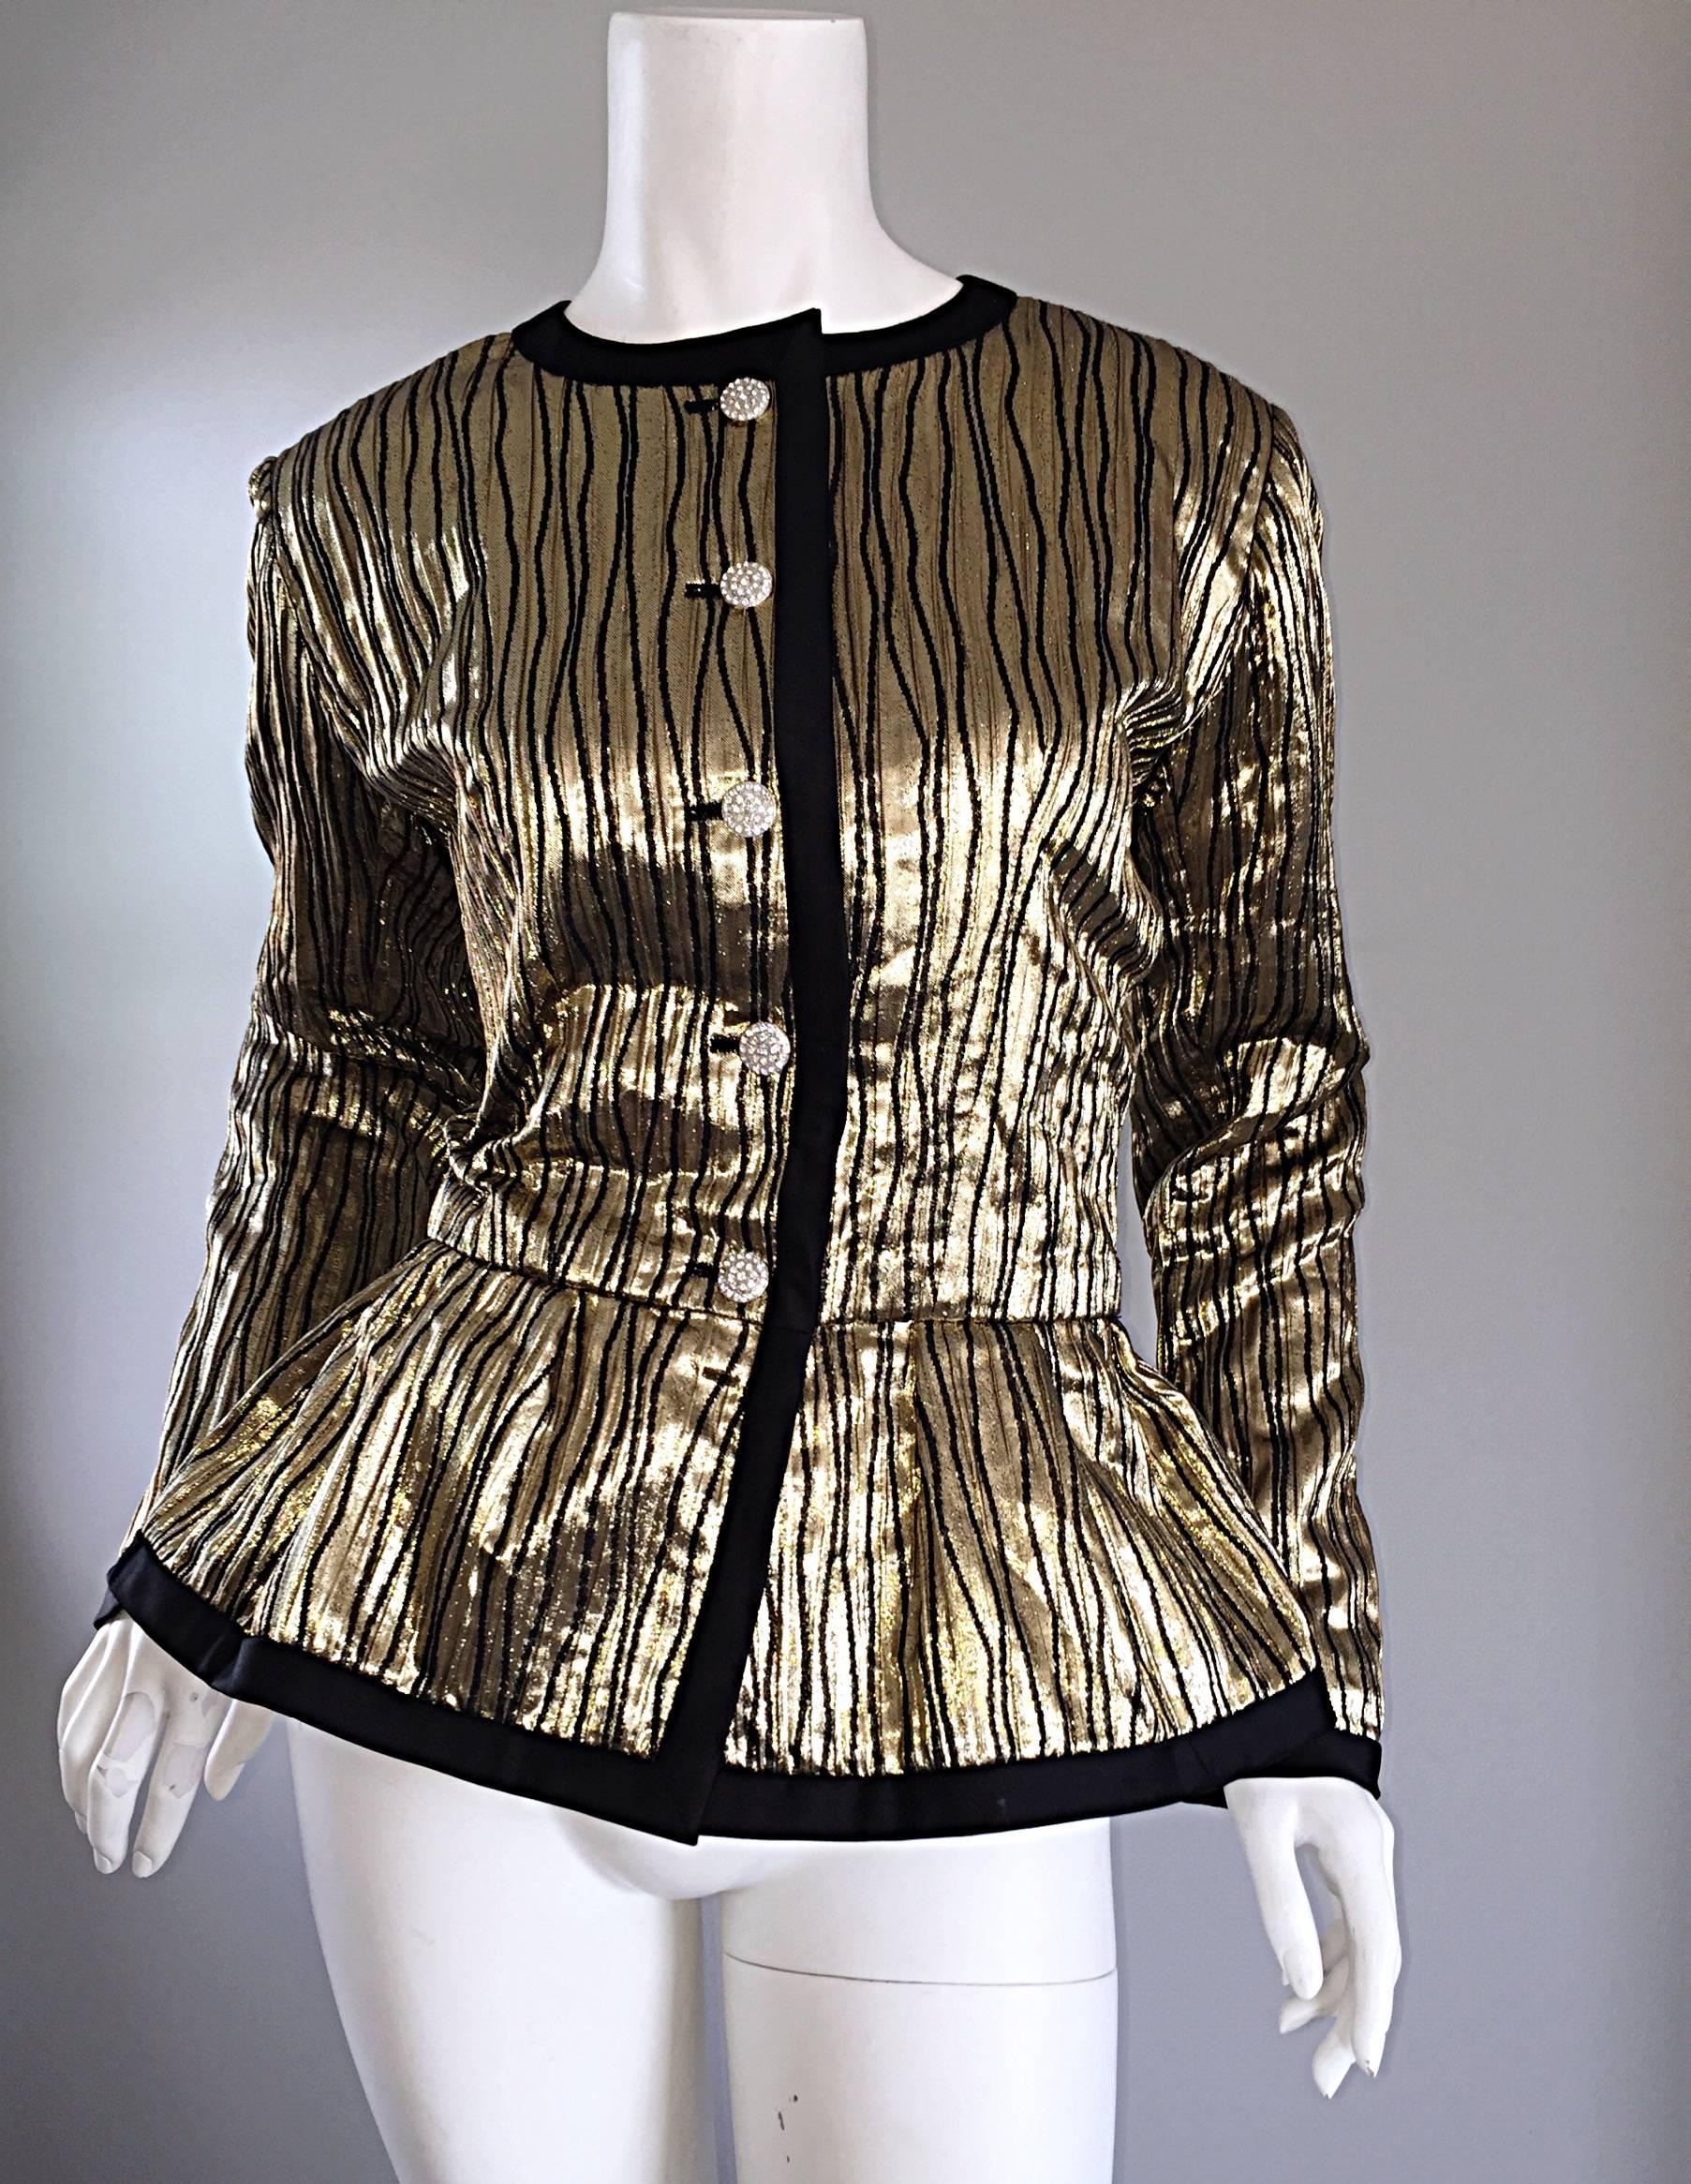 Superb vintage YVES SAINT LAURENT 'Rive Gauche' gold and black silk metallic jacket! Every ounce of this lovely jacket just screams INCREDIBLE!!! Rhinestone buttons up the bodice, with a spare on included on the interior. Features a peplum at the